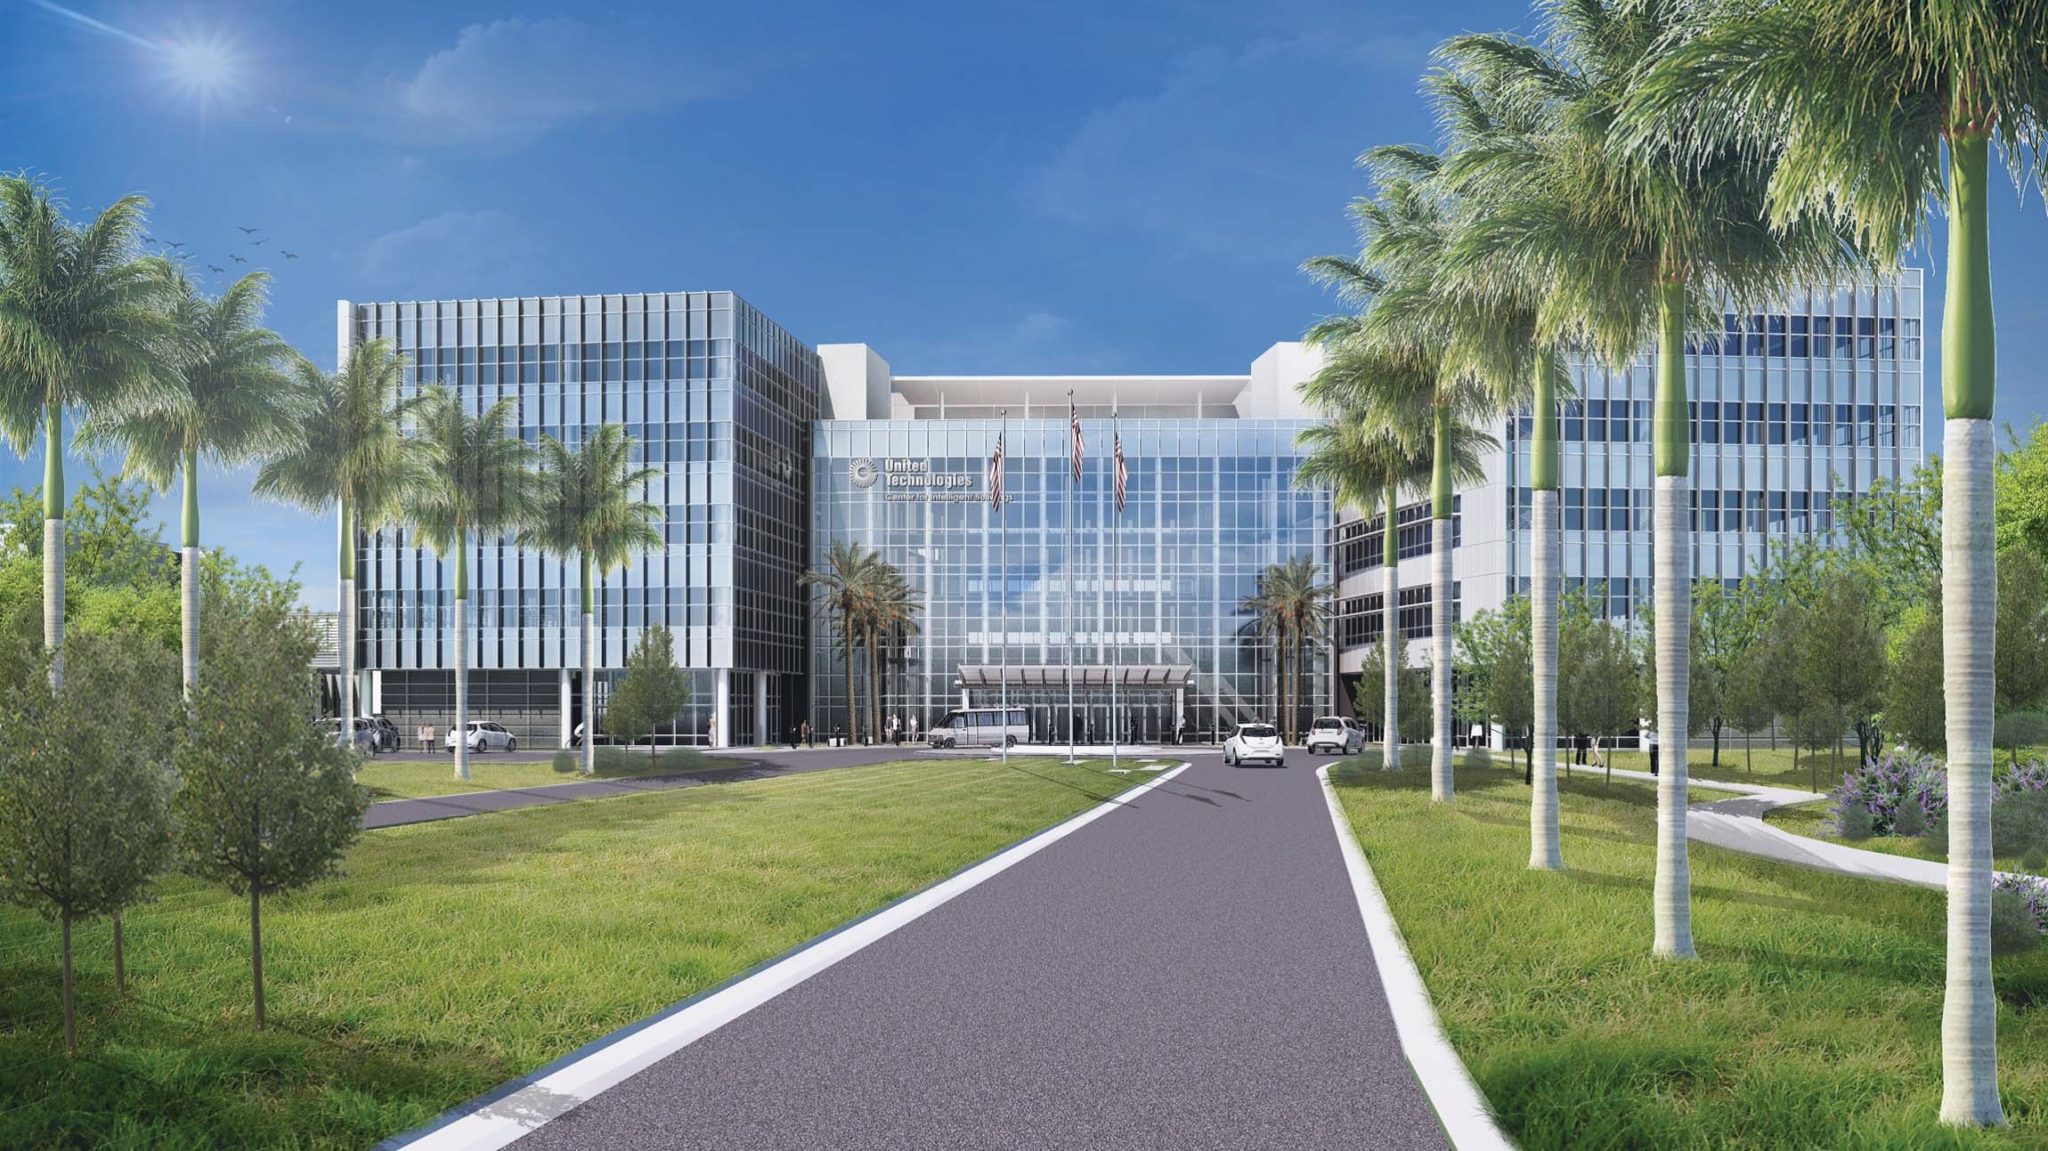 United Technology set to open $115 million facility in Palm Beach Gardens